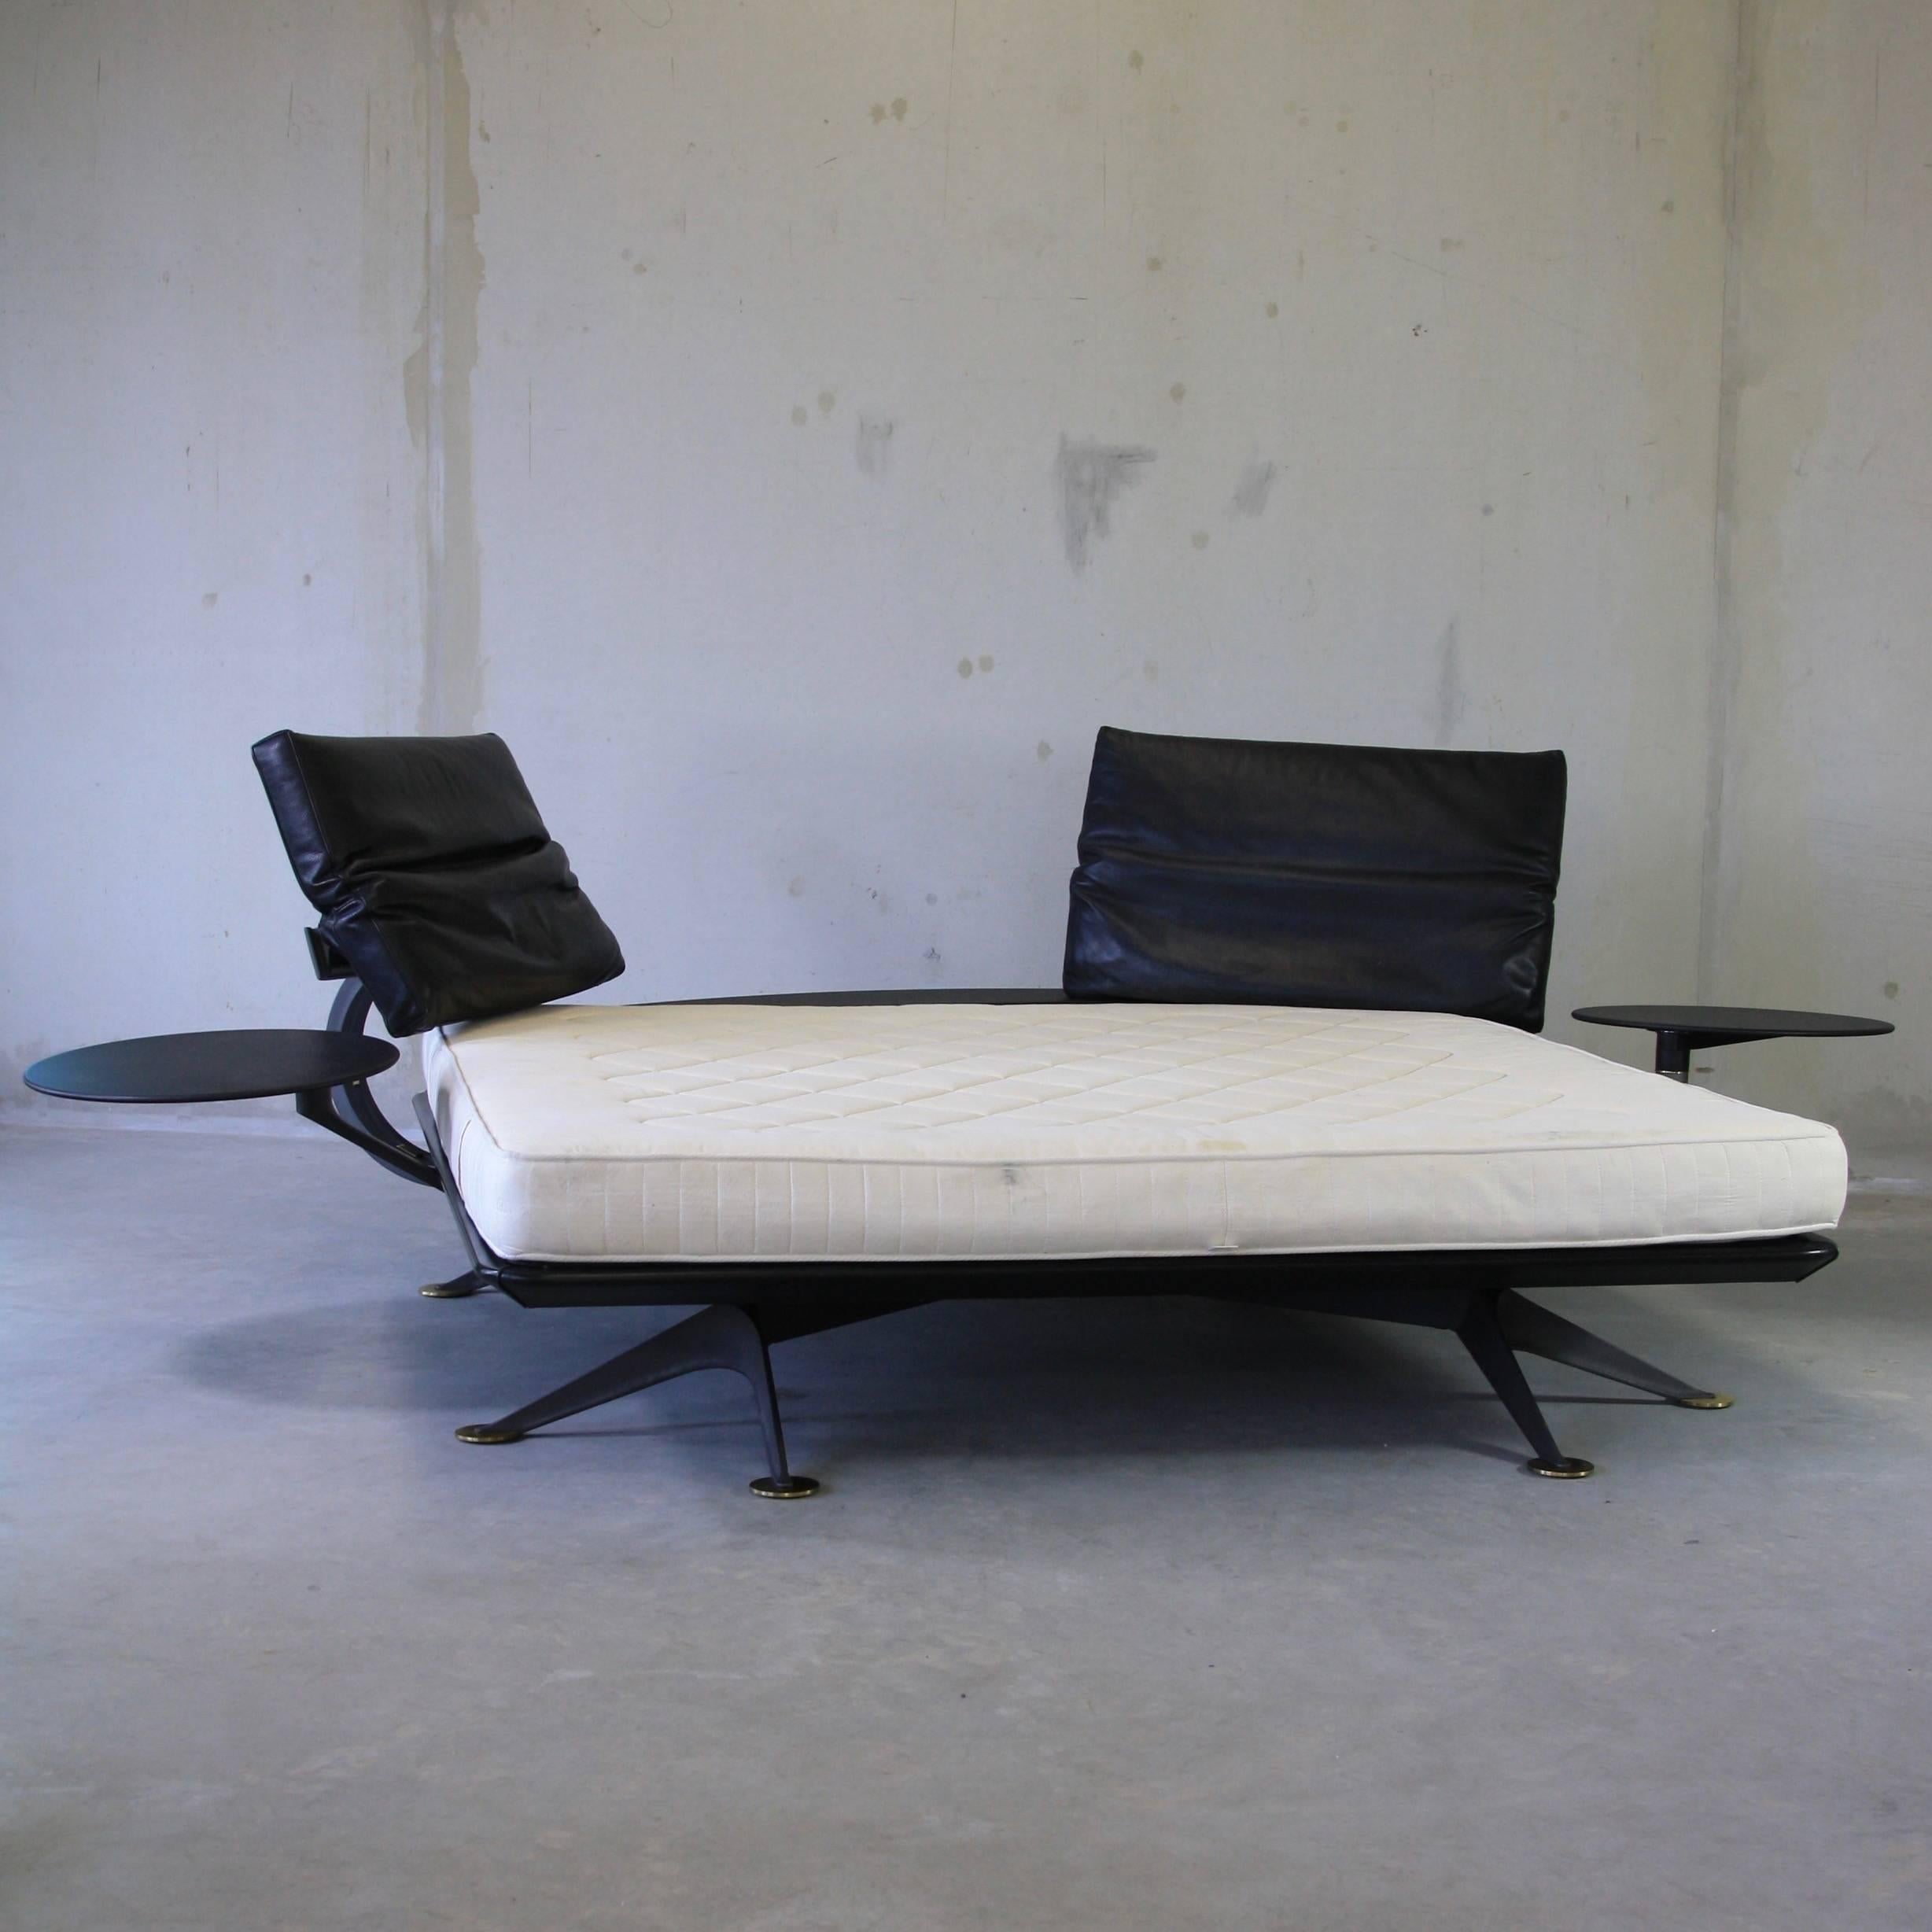 Designer Bed by Paolo Piva for B&B, Italia 3